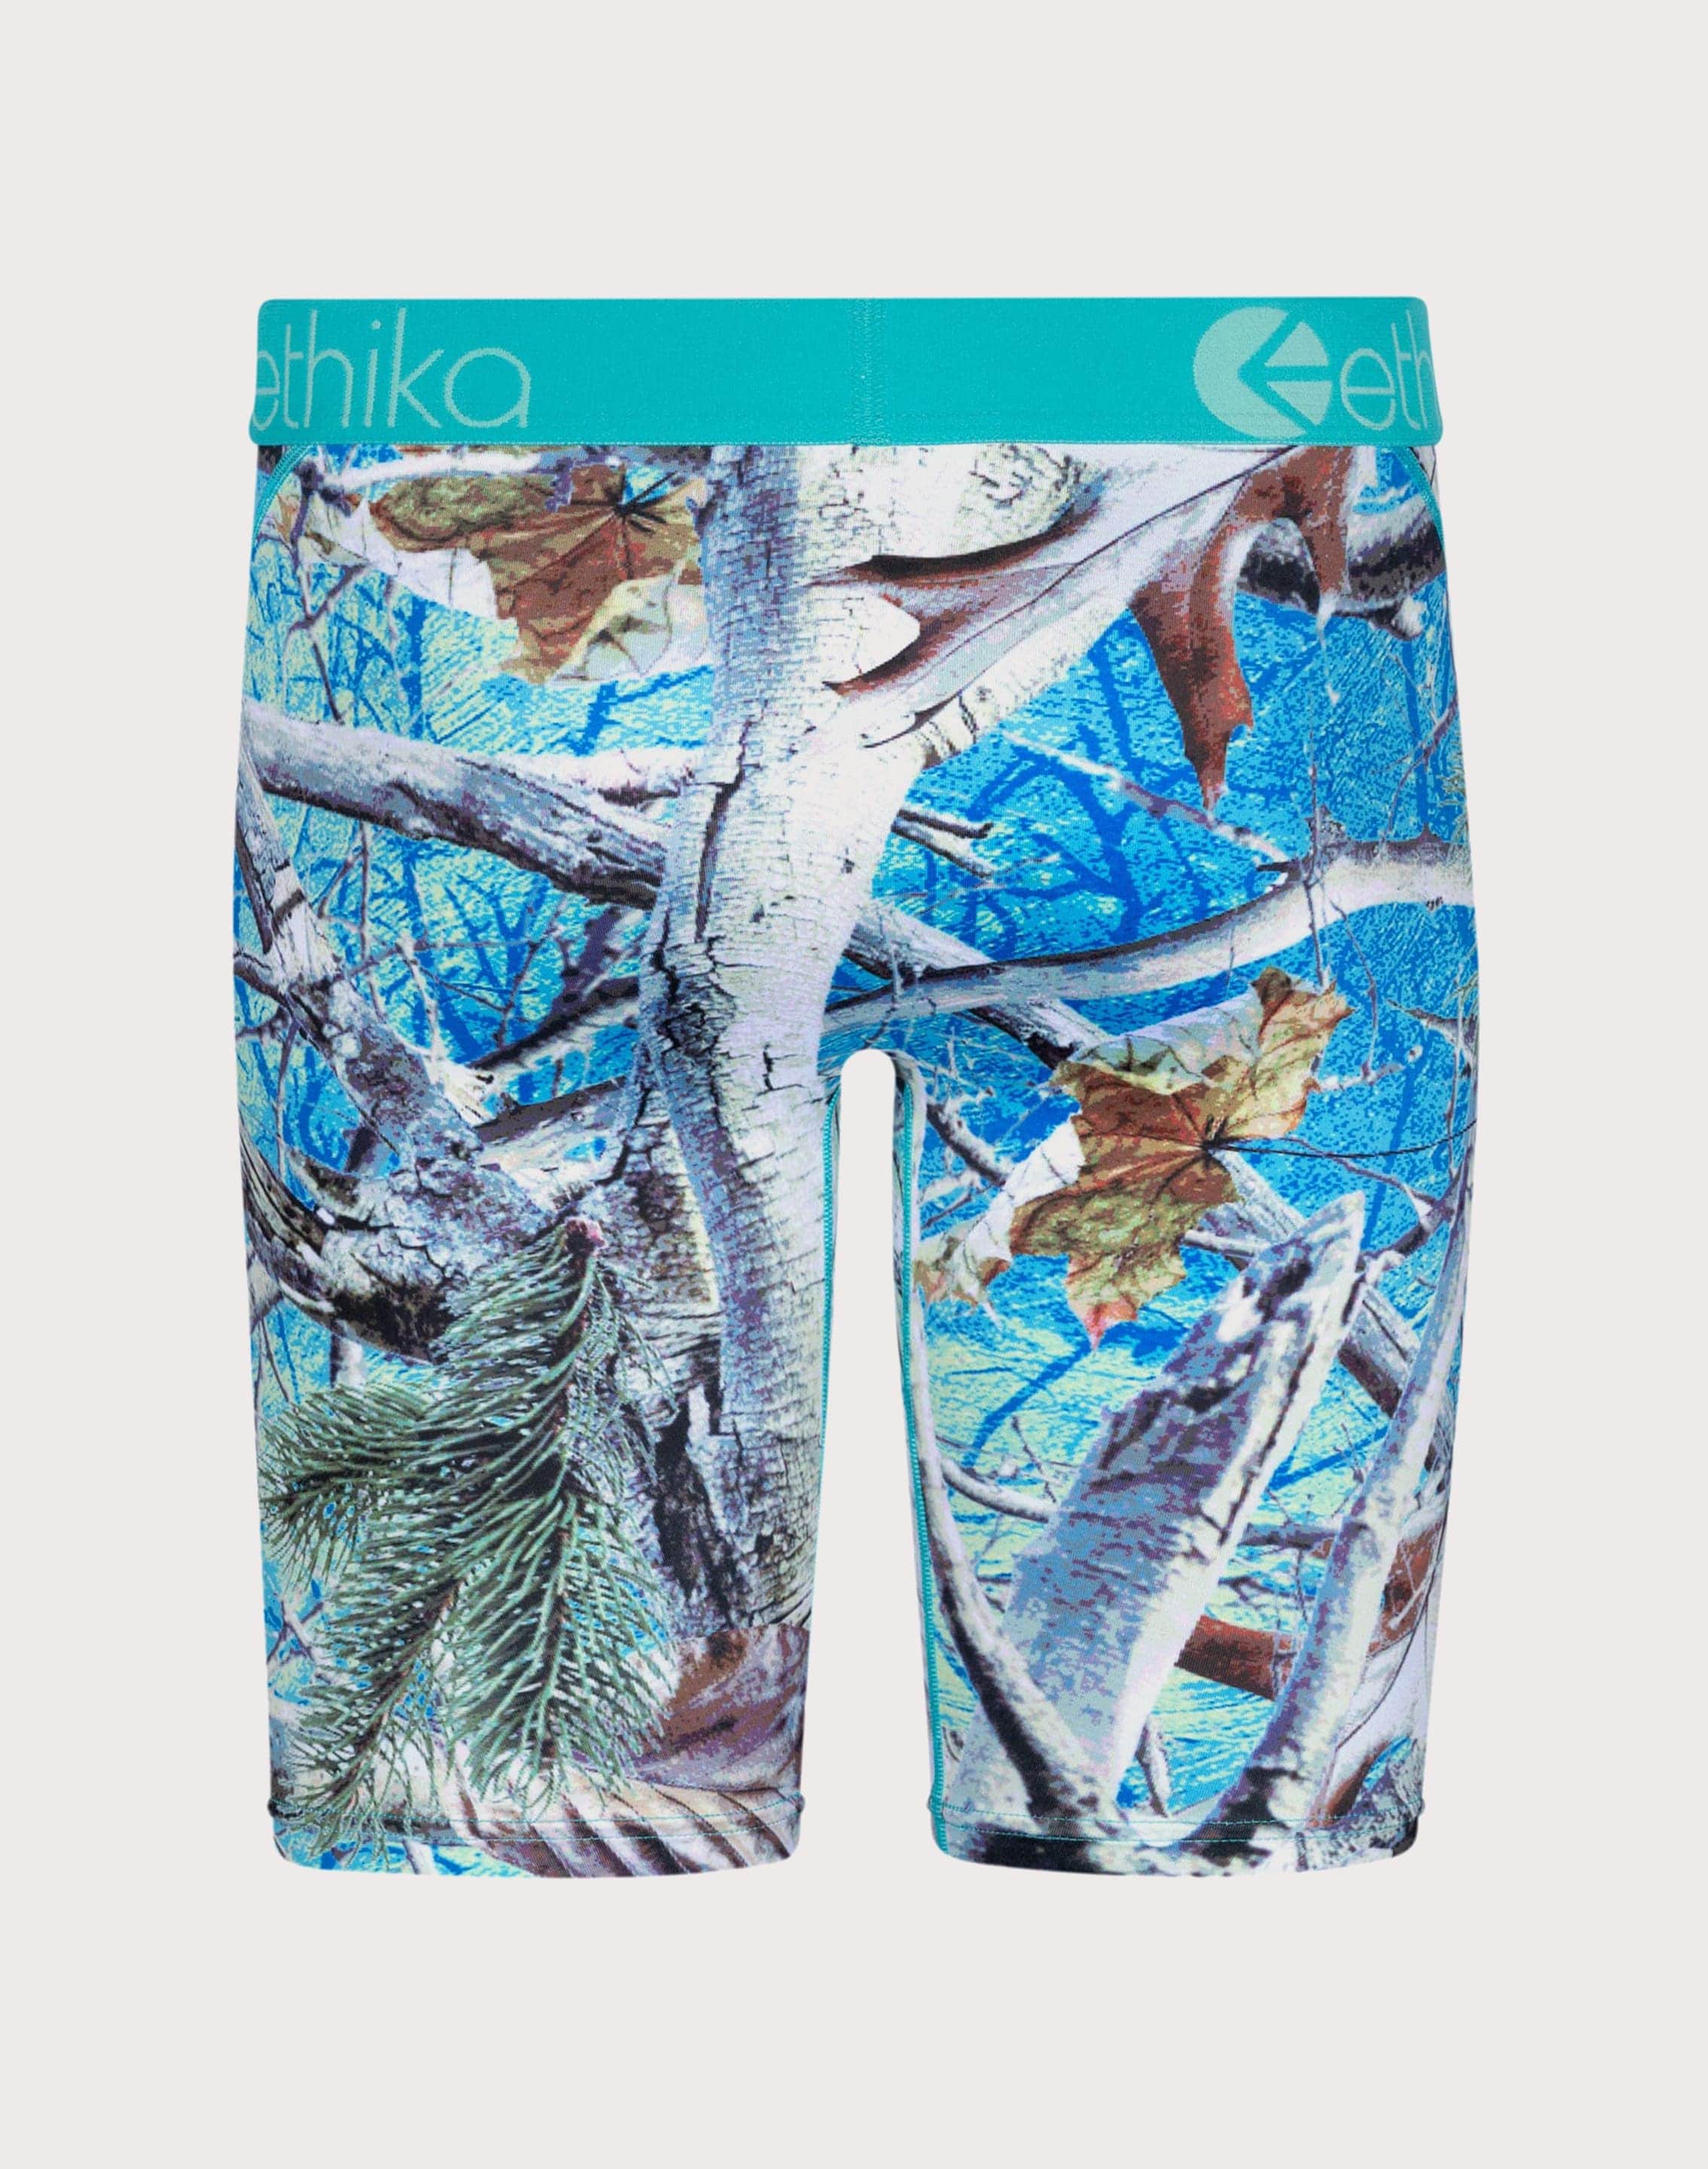 Ethika Hunting Game Boxer Briefs – DTLR